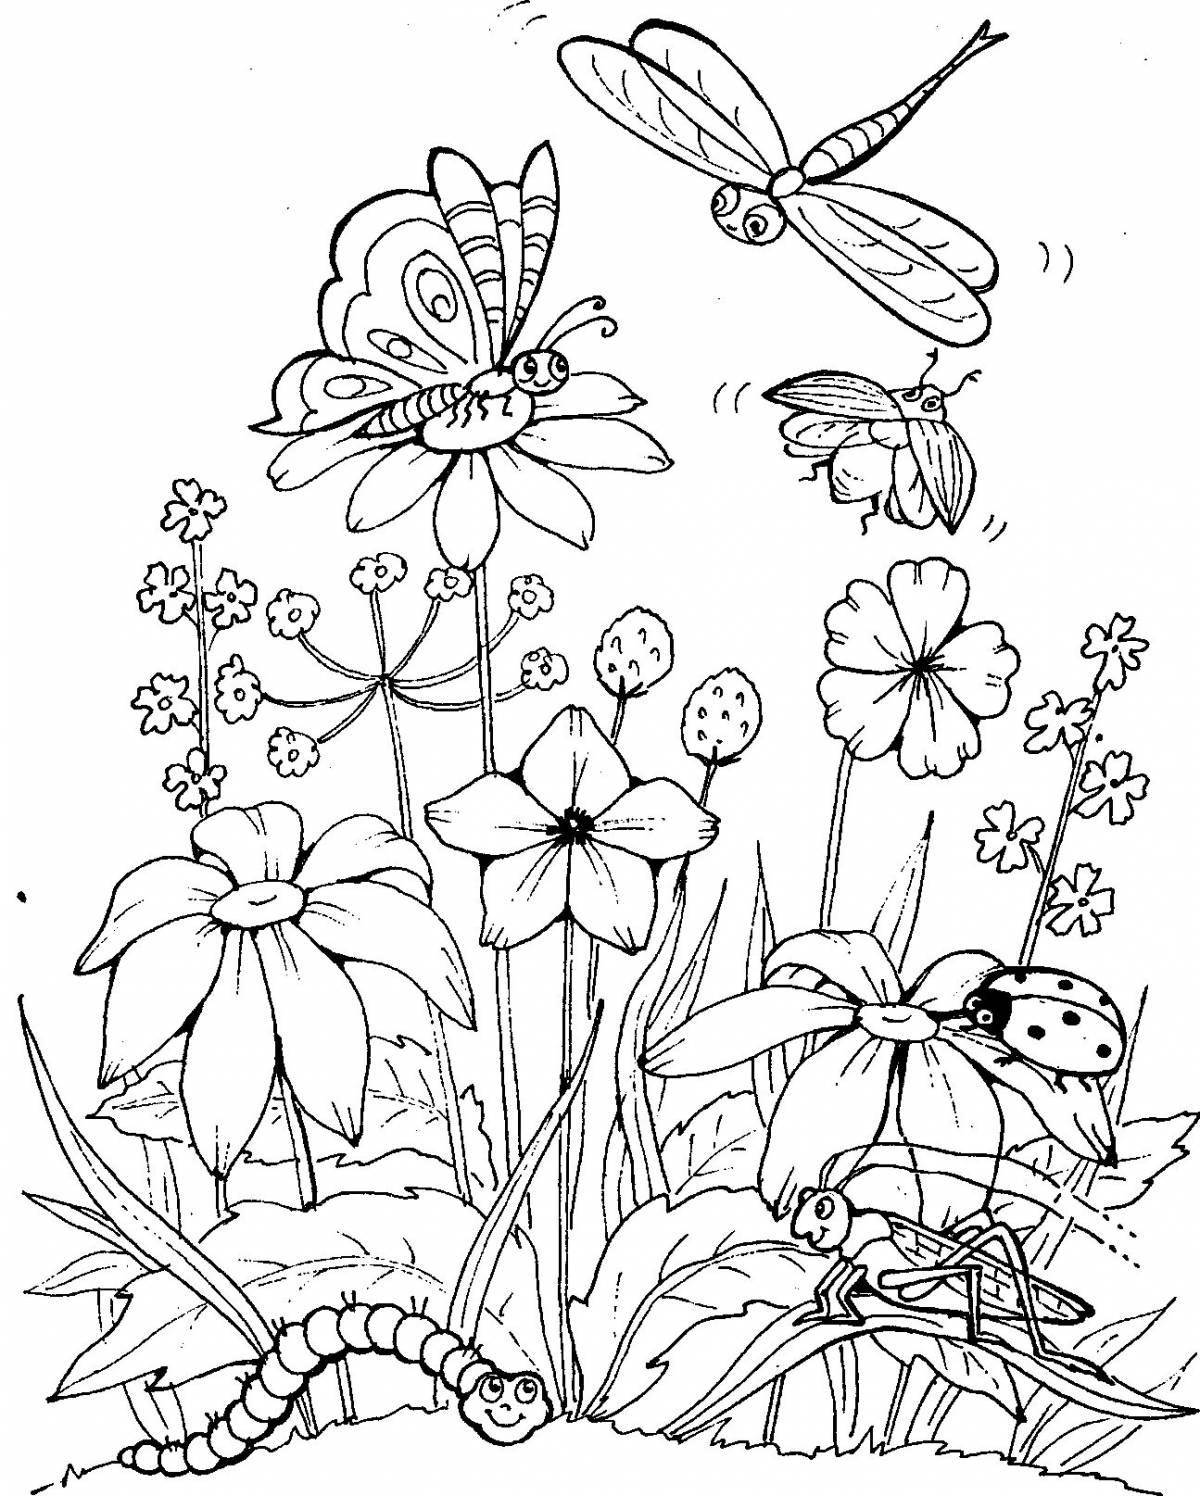 Coloring page gorgeous meadow for kids